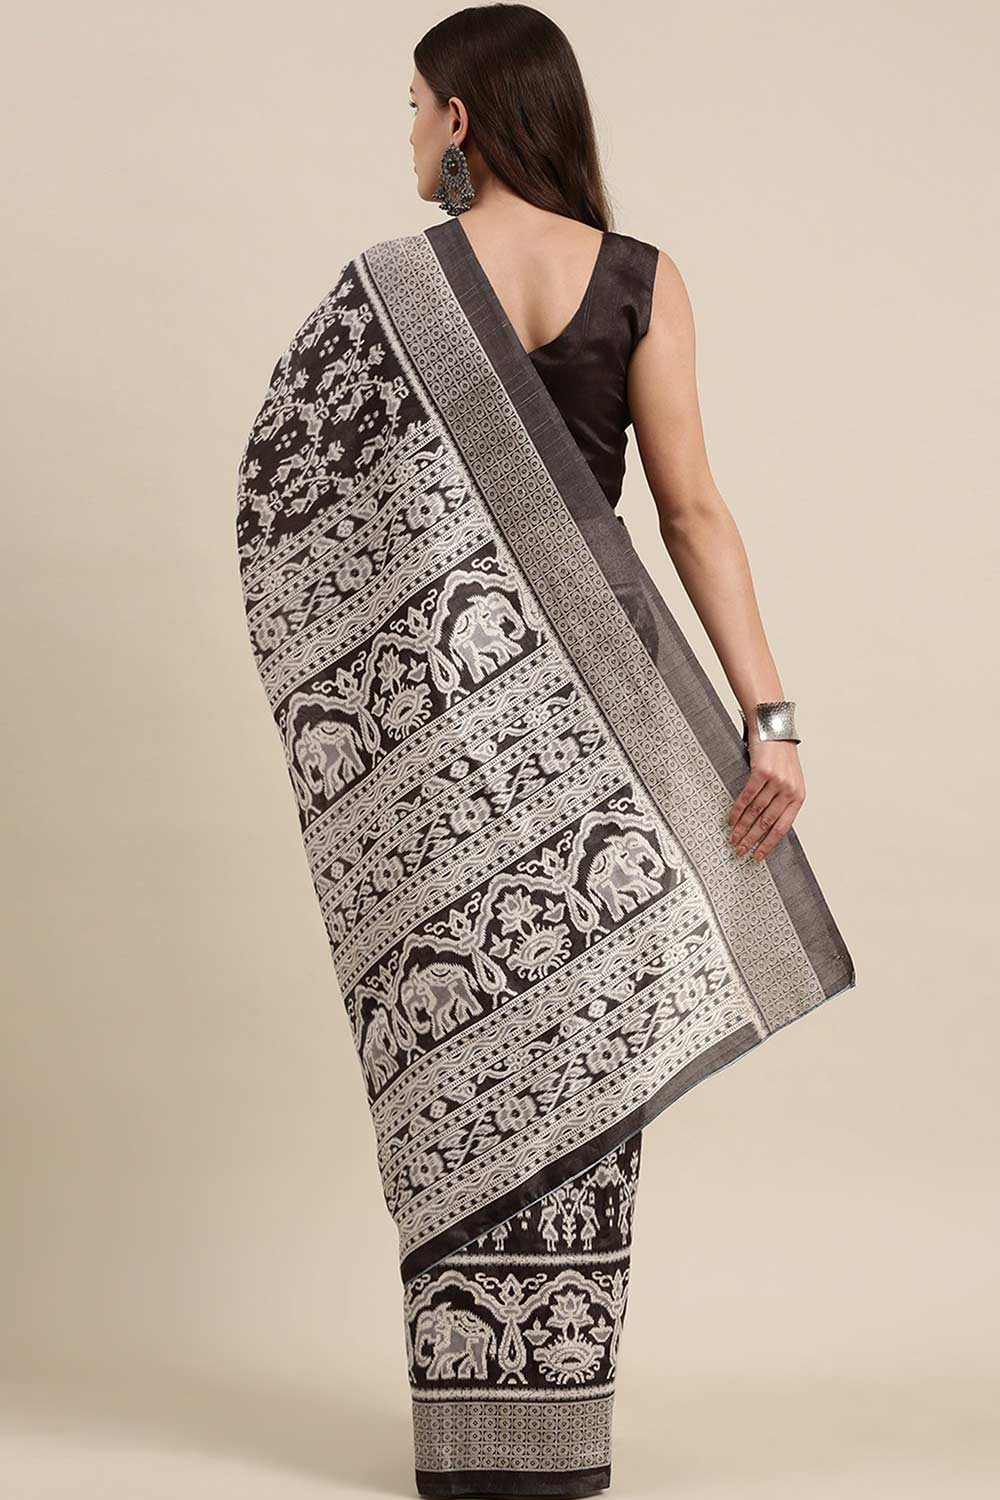 Shop Seema Bhagalpuri Silk Charcoal Grey Printed Celebrity One Minute Saree at best offer at our  Store - One Minute Saree